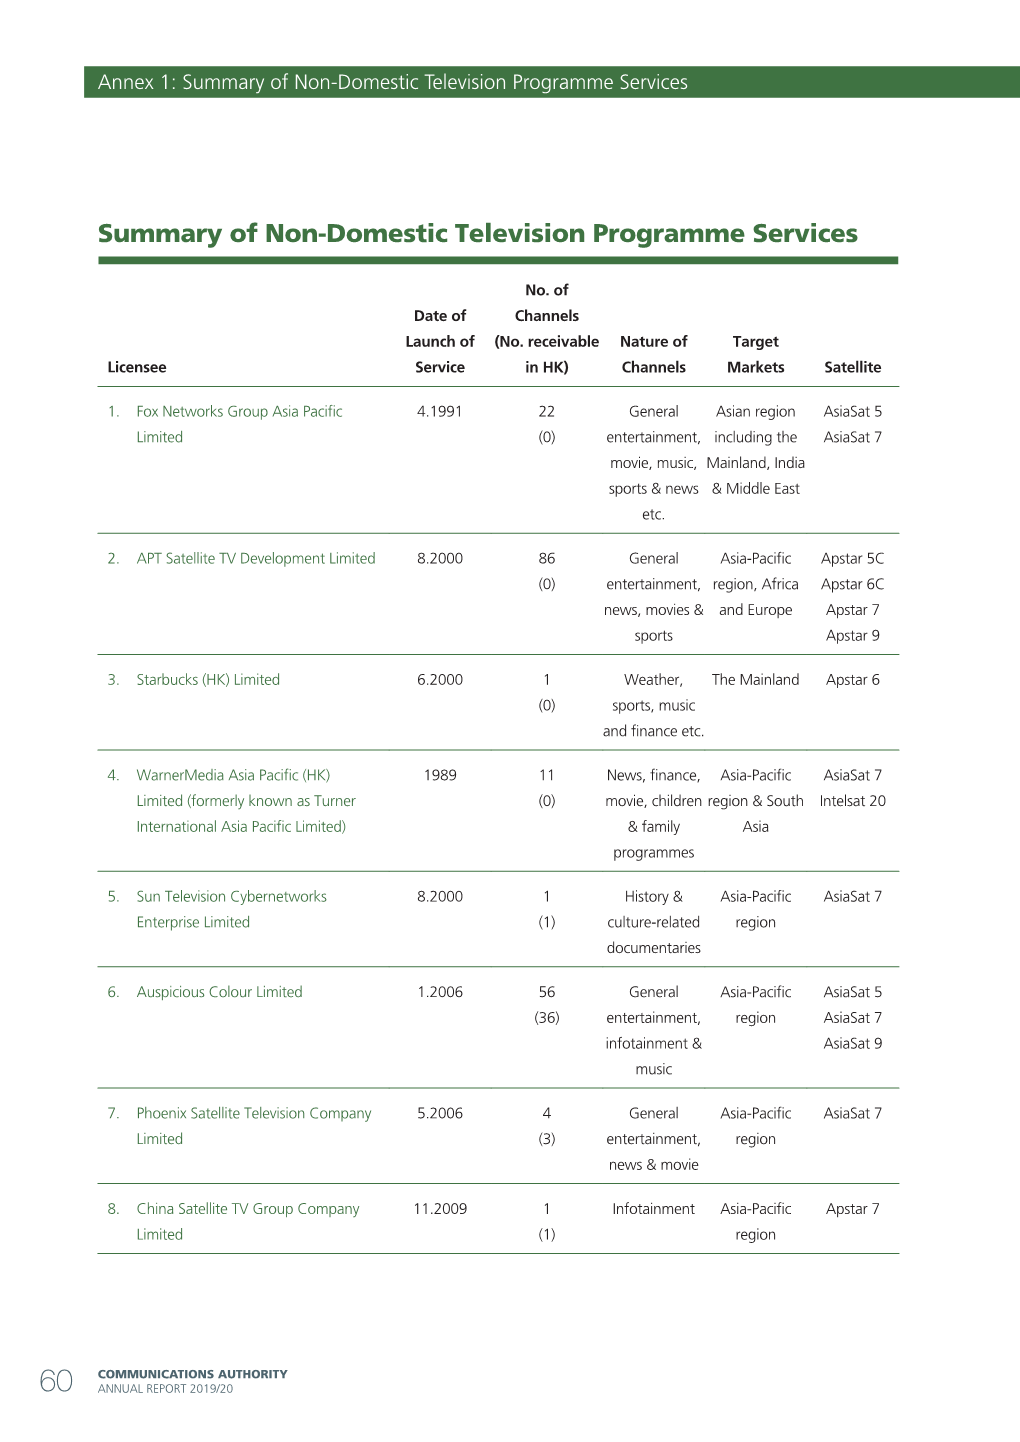 Summary of Non-Domestic Television Programme Services